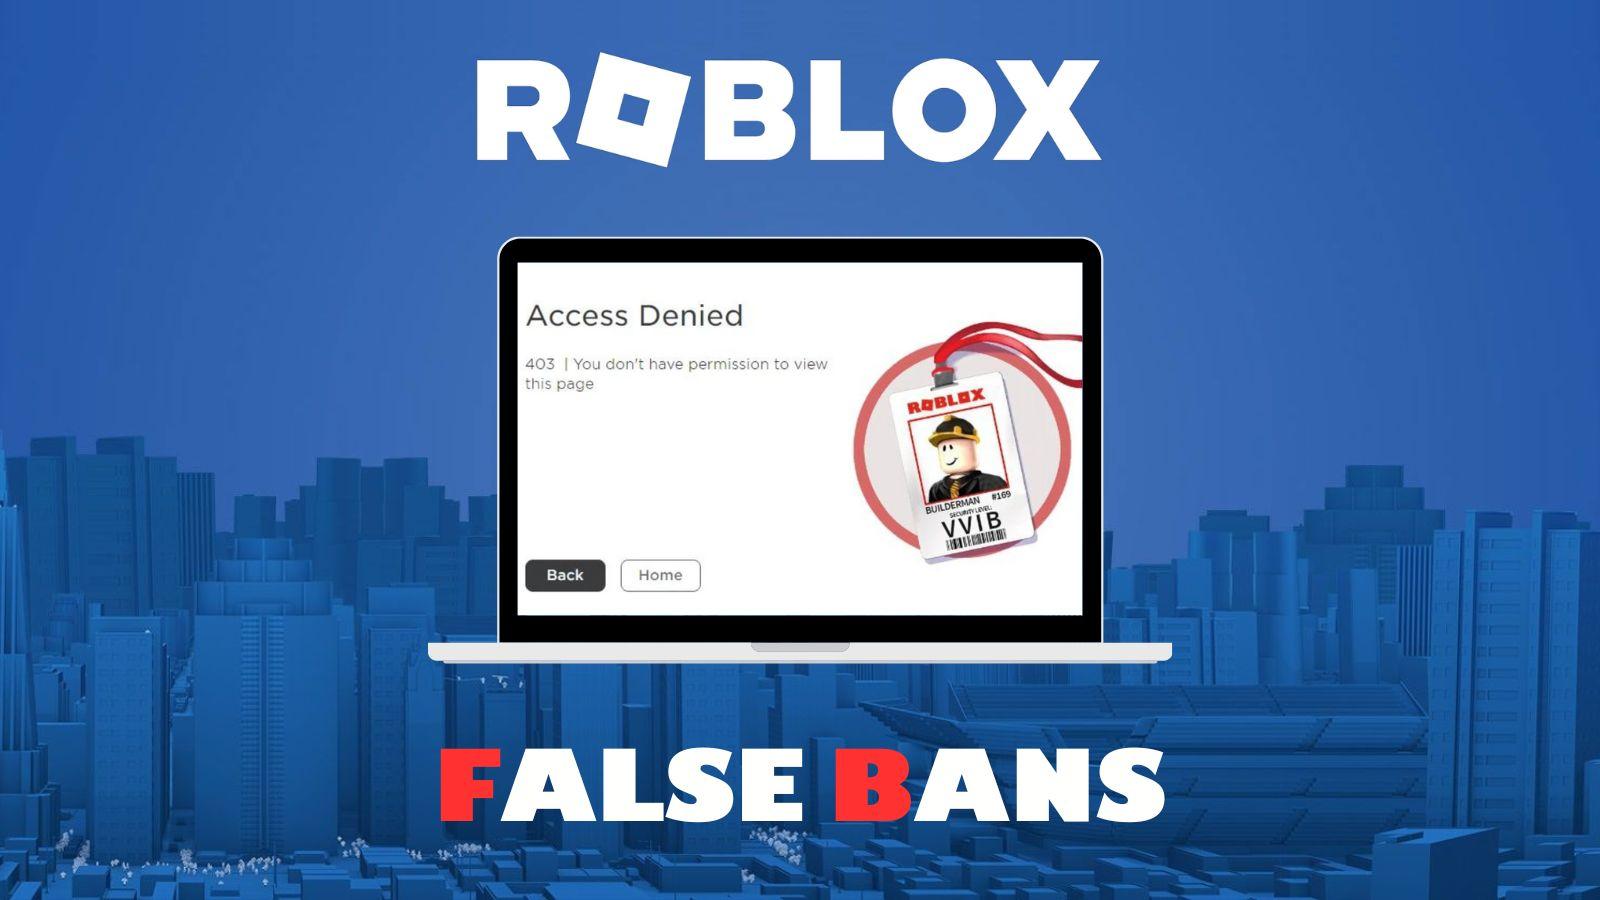 You will NO LONGER to be able to log into Roblox with your